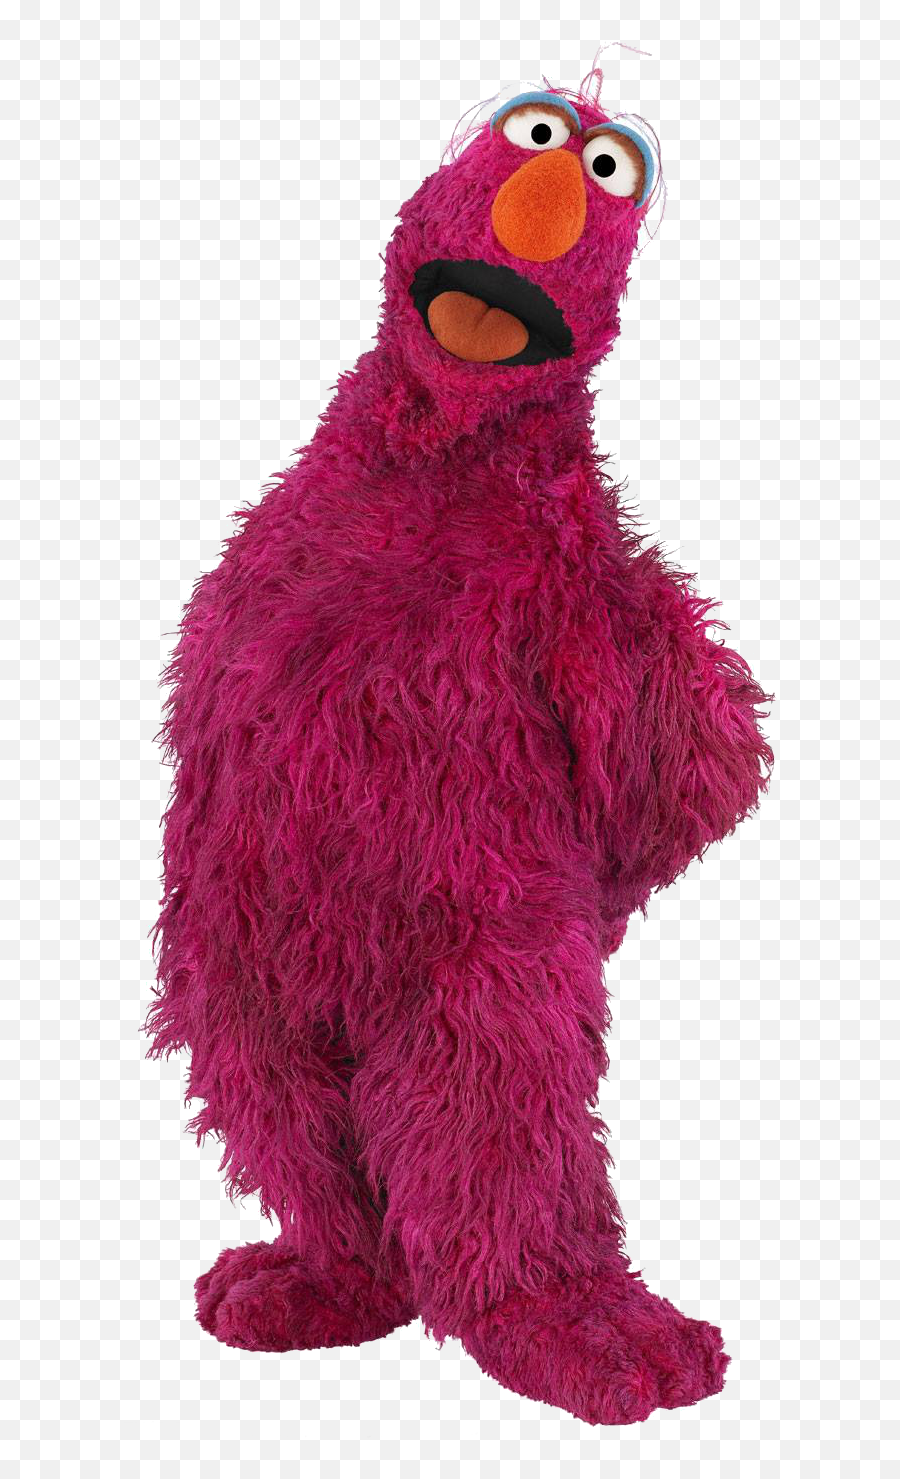 Sesame Street Character Png Picture - Telly Monster Sesame Street,Sesame Street Characters Png